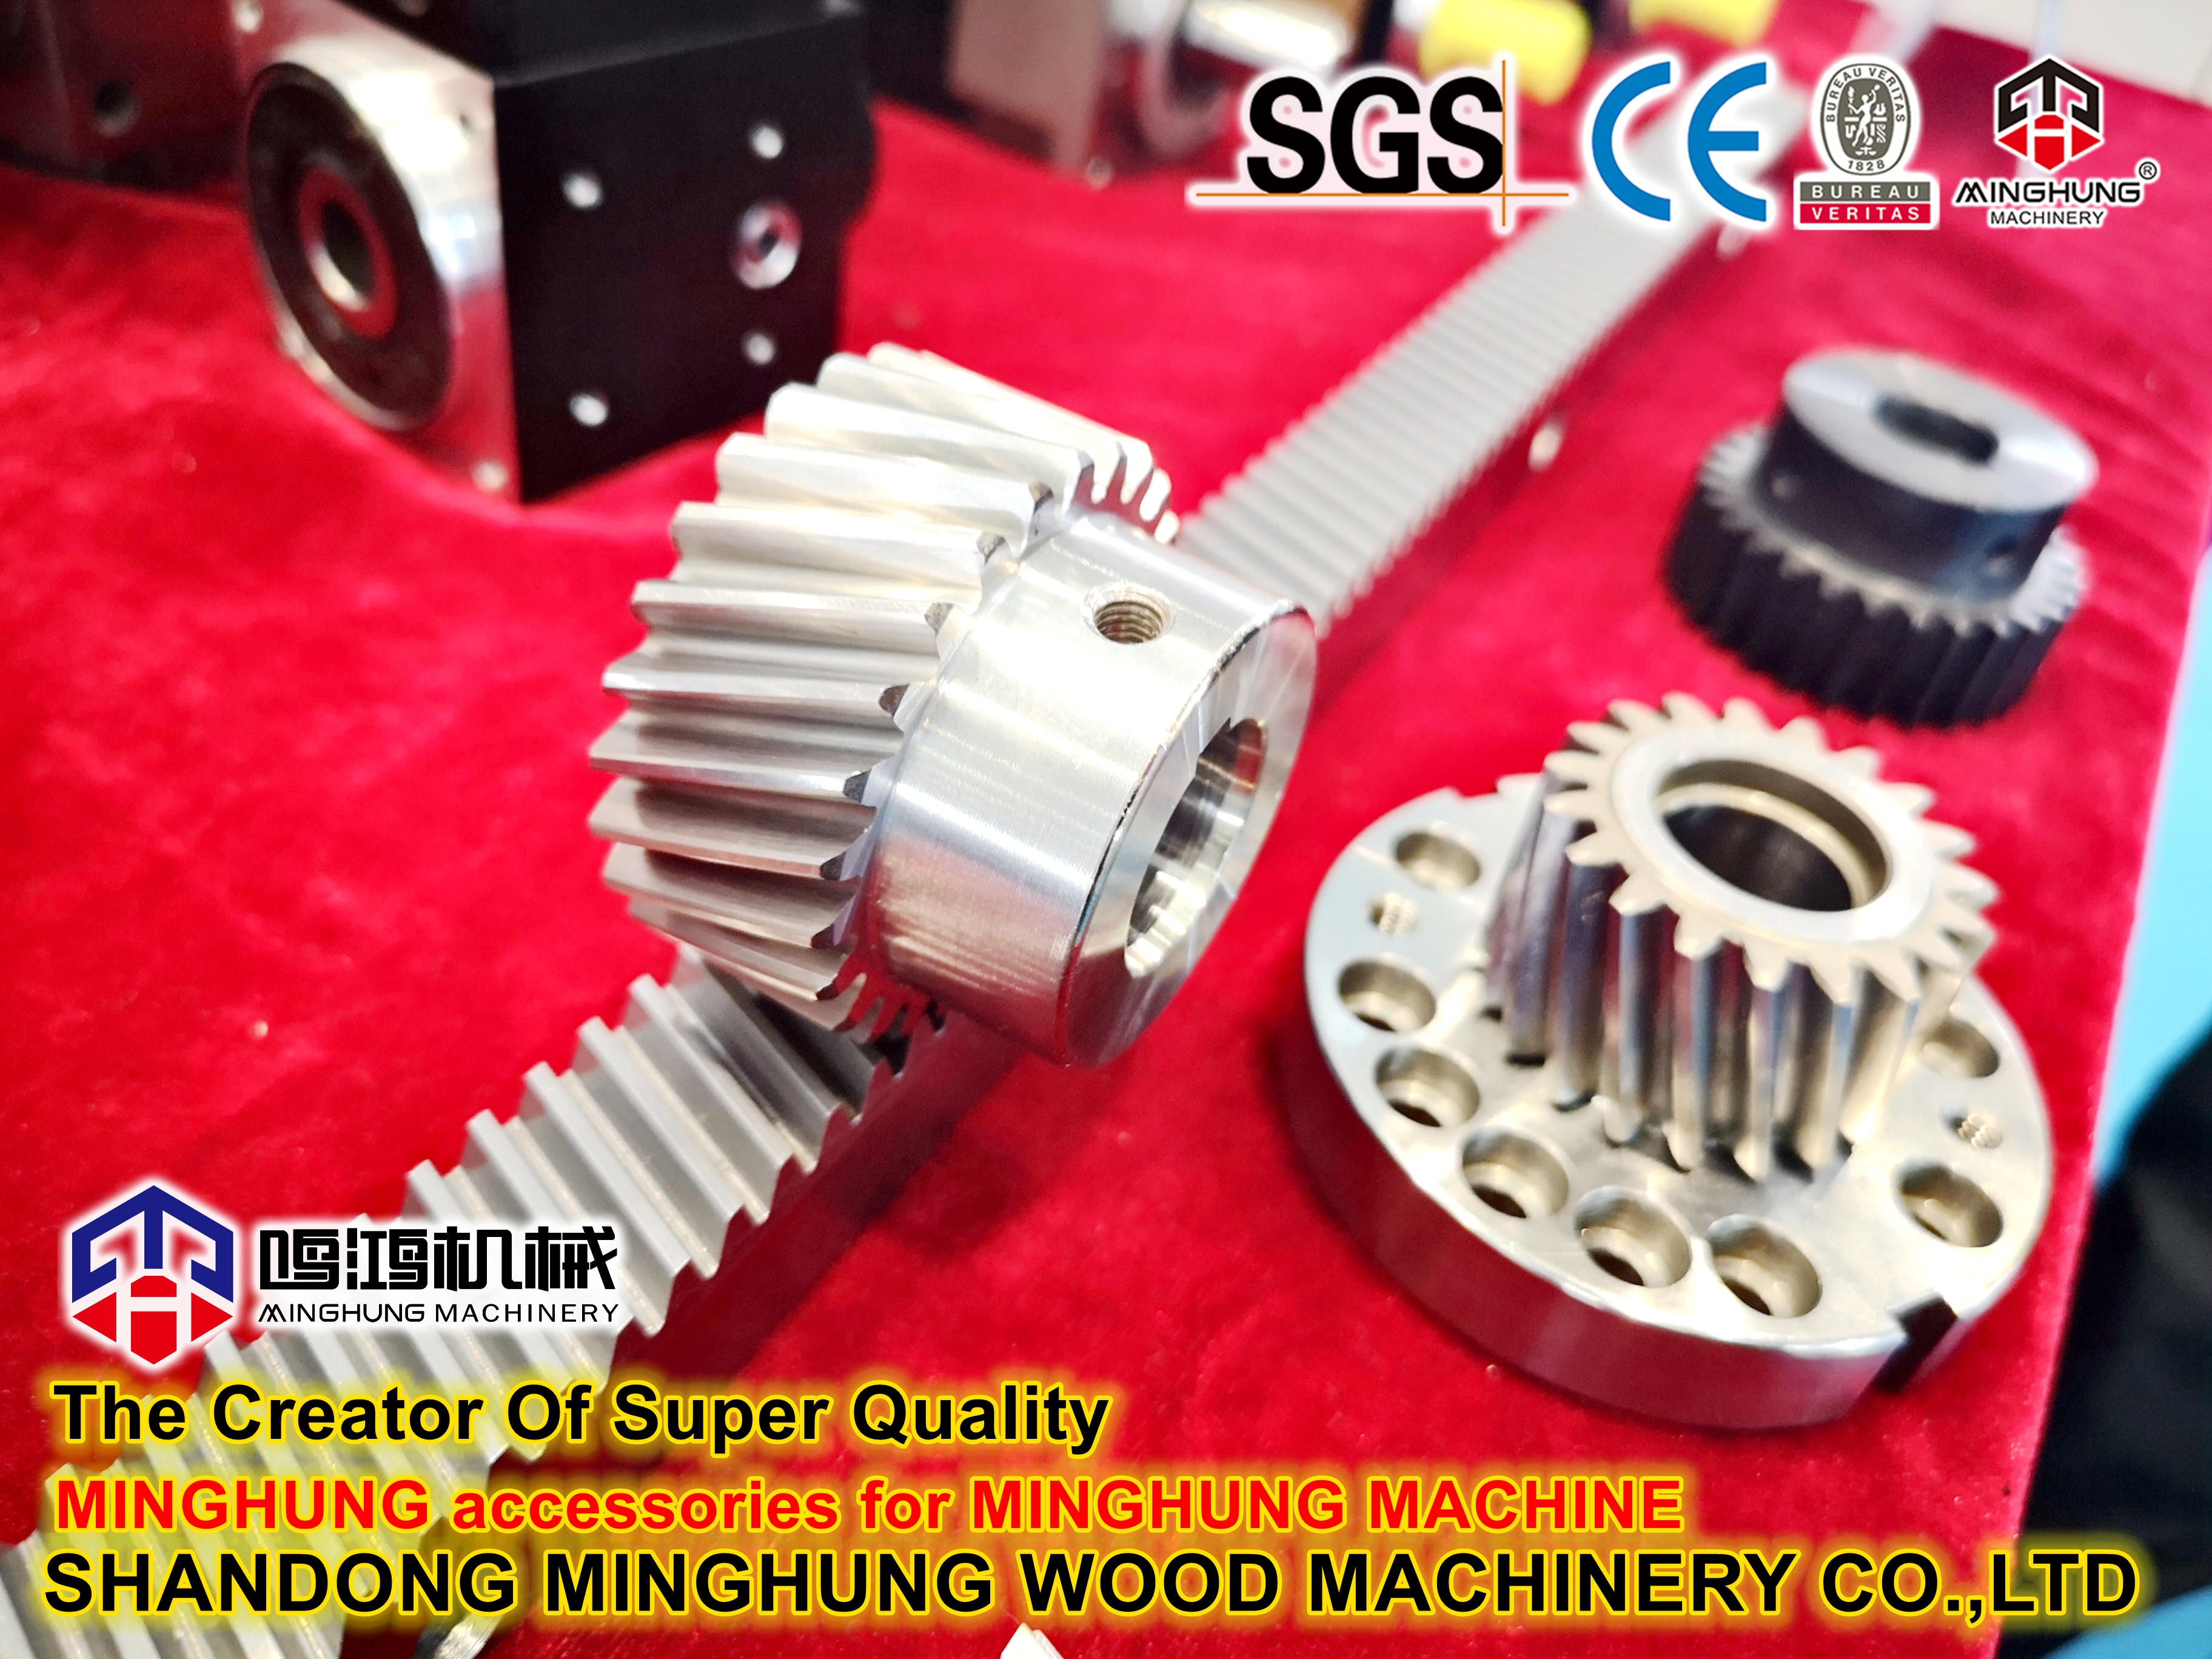 MINGHUNG ACCESSORIES FOR MINGHUNG MACHINE